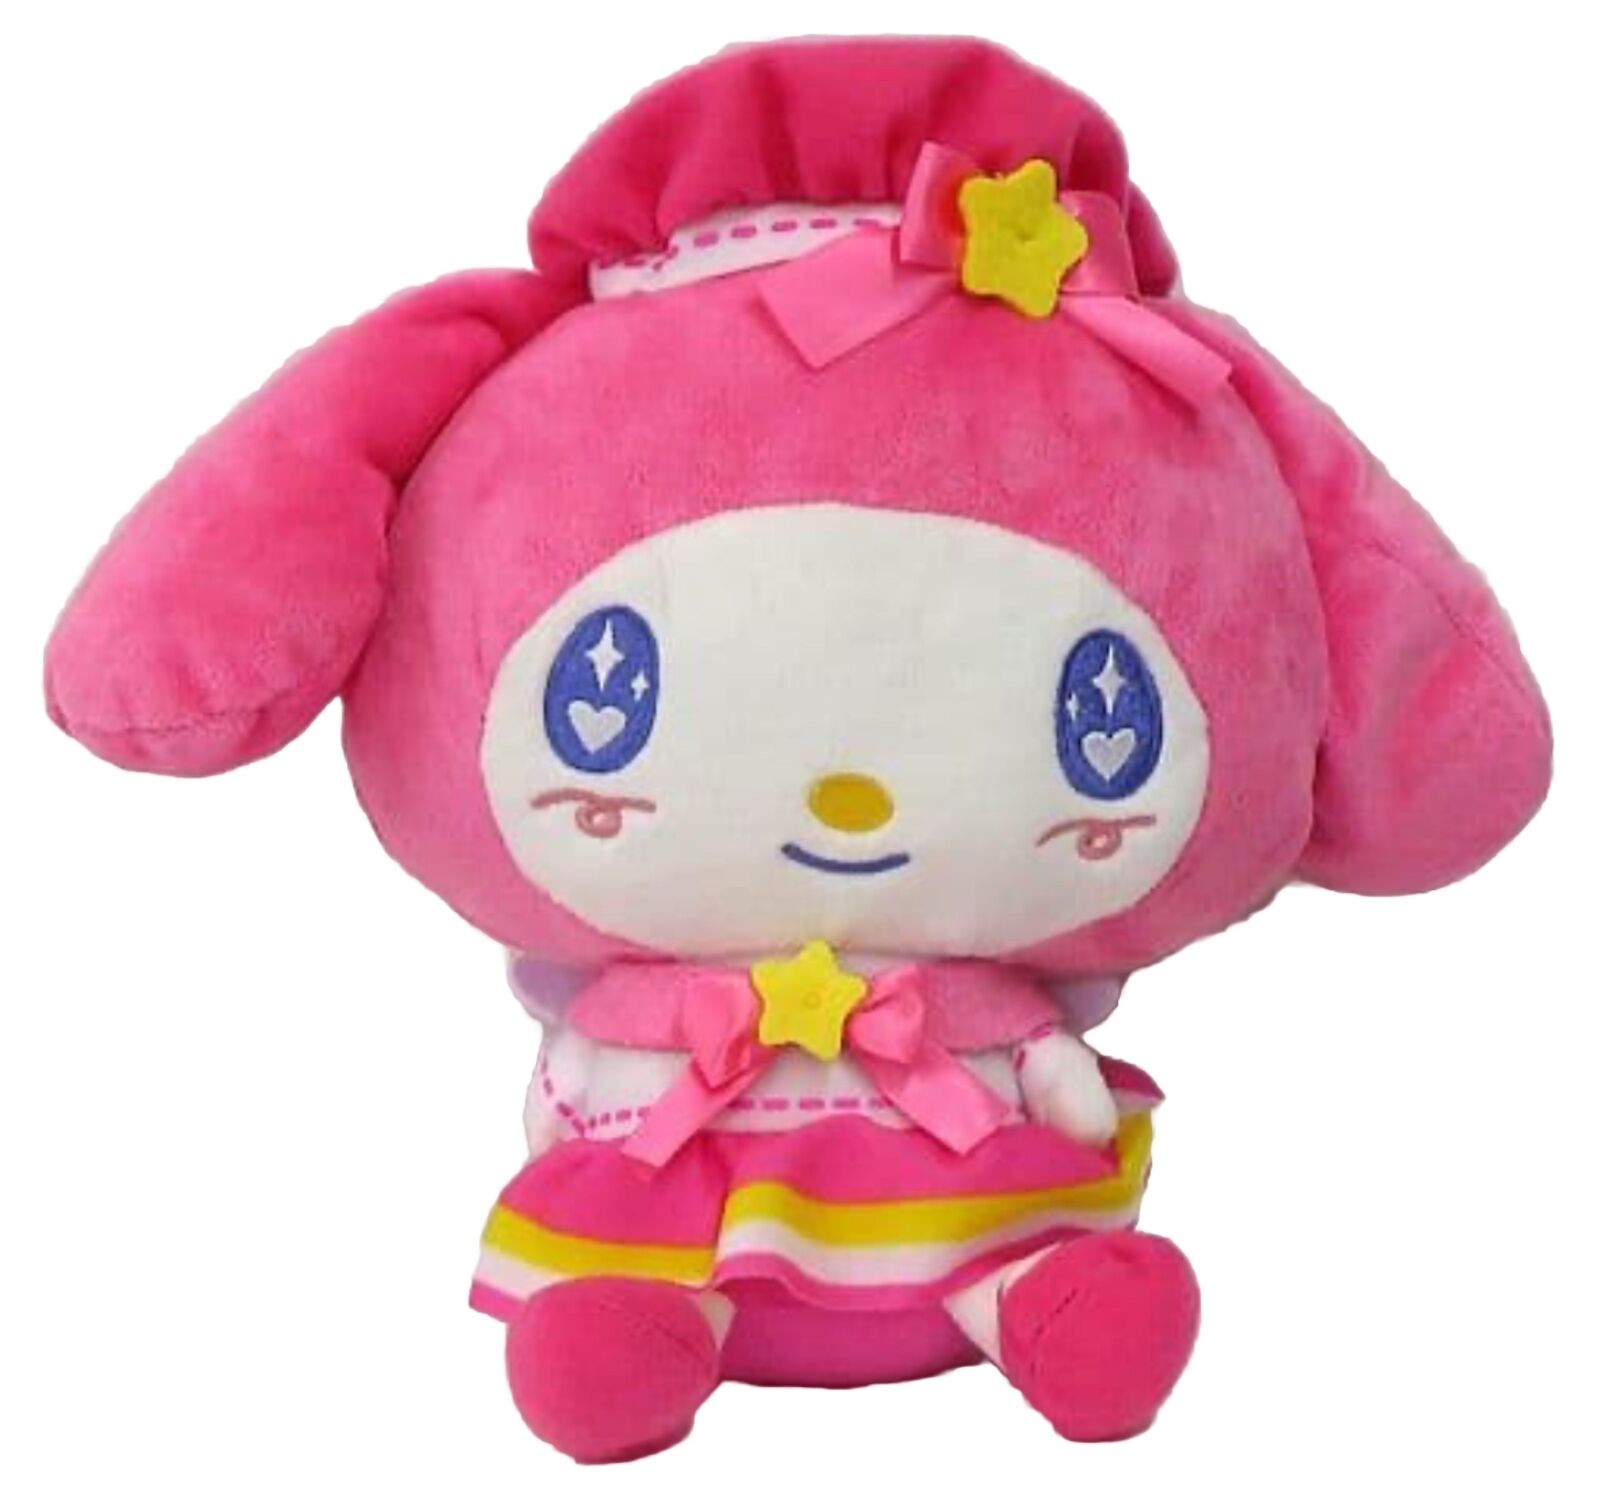 New Official Sanrio My Melody Magical Mate Medium Size Plush Toy Doll From Japan